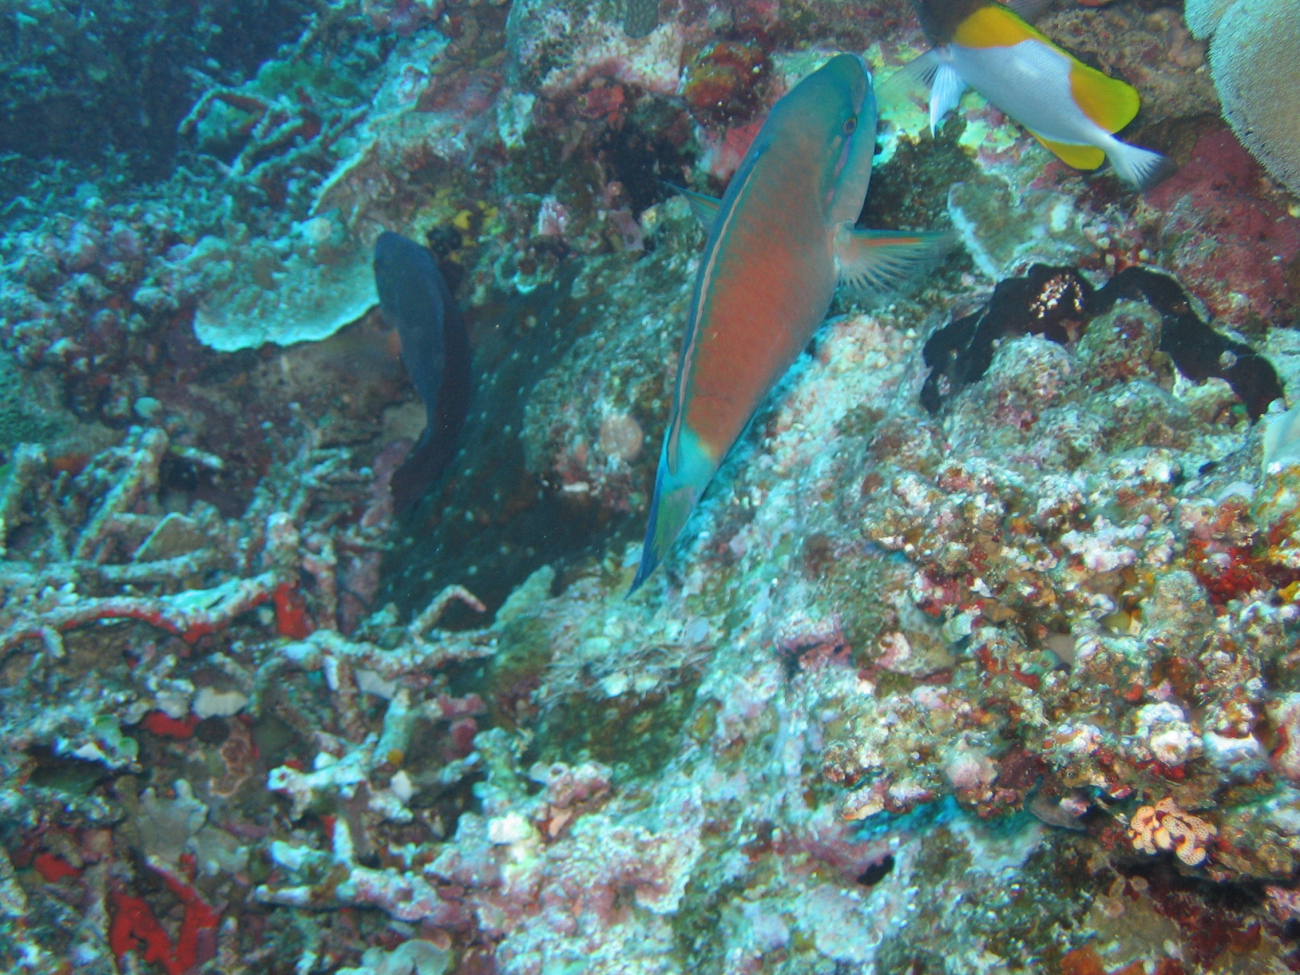 Tentatively identified as a bullethead parrotfish